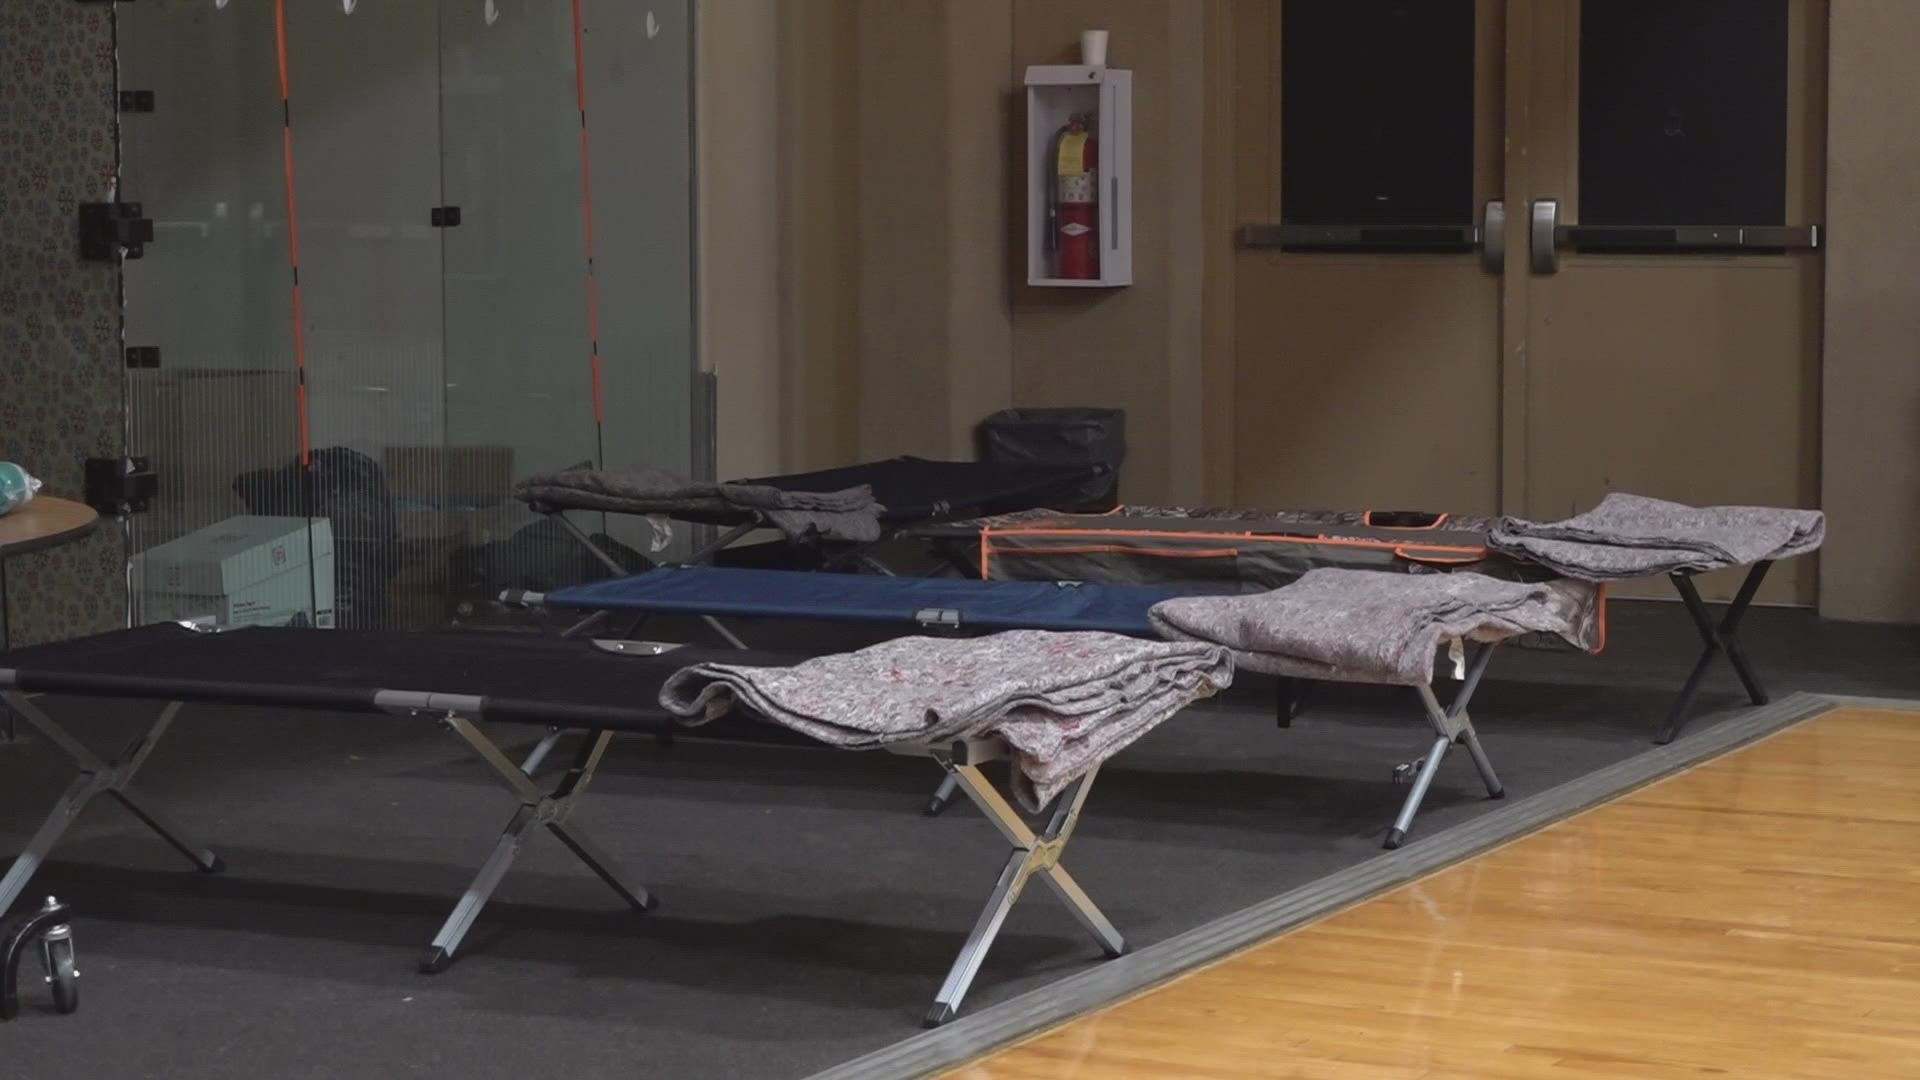 The First Baptist Maryville Church is opening its warming shelter a little earlier than usual this year, helping unsheltered people stay warm.